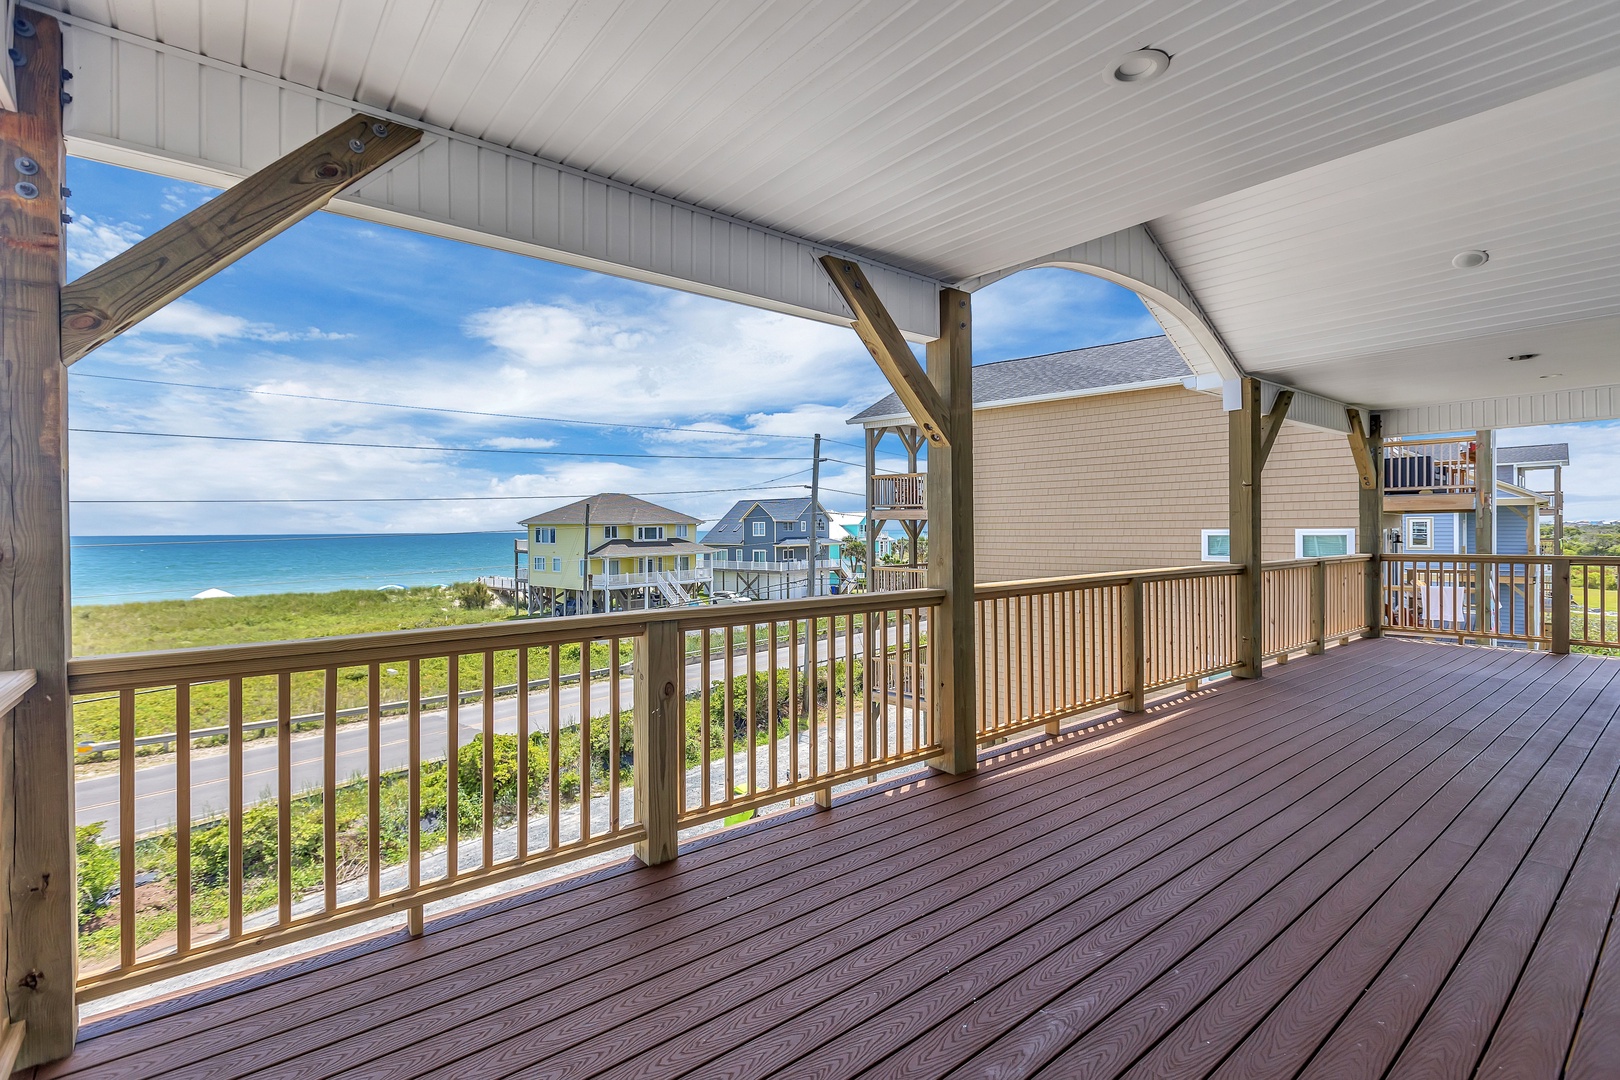 The covered deck with beautiful ocean views